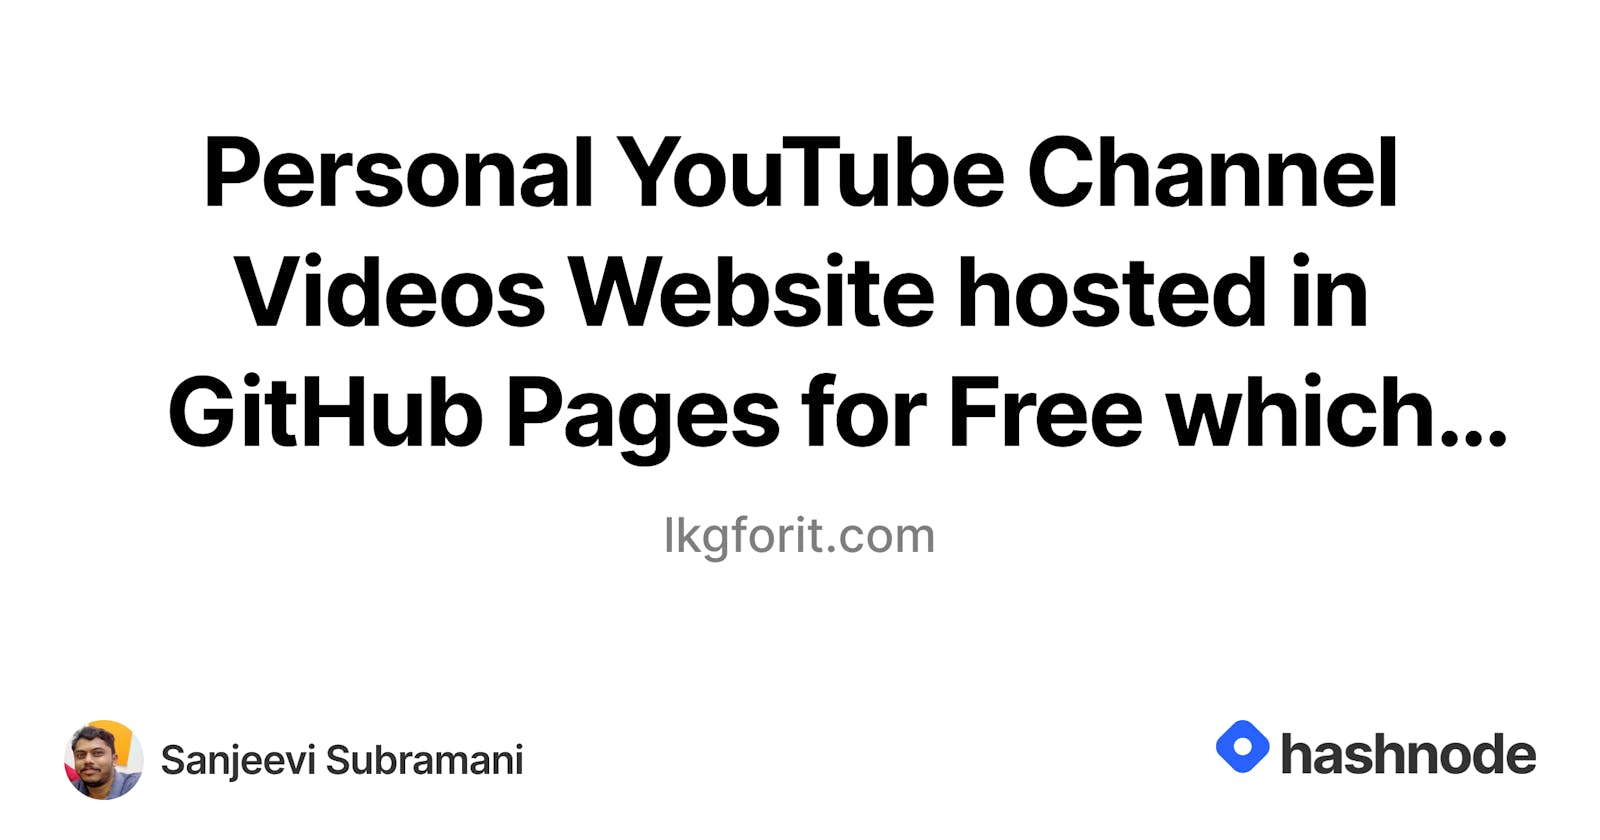 Personal YouTube Channel Videos Website hosted in GitHub Pages for Free which populates content automatically.